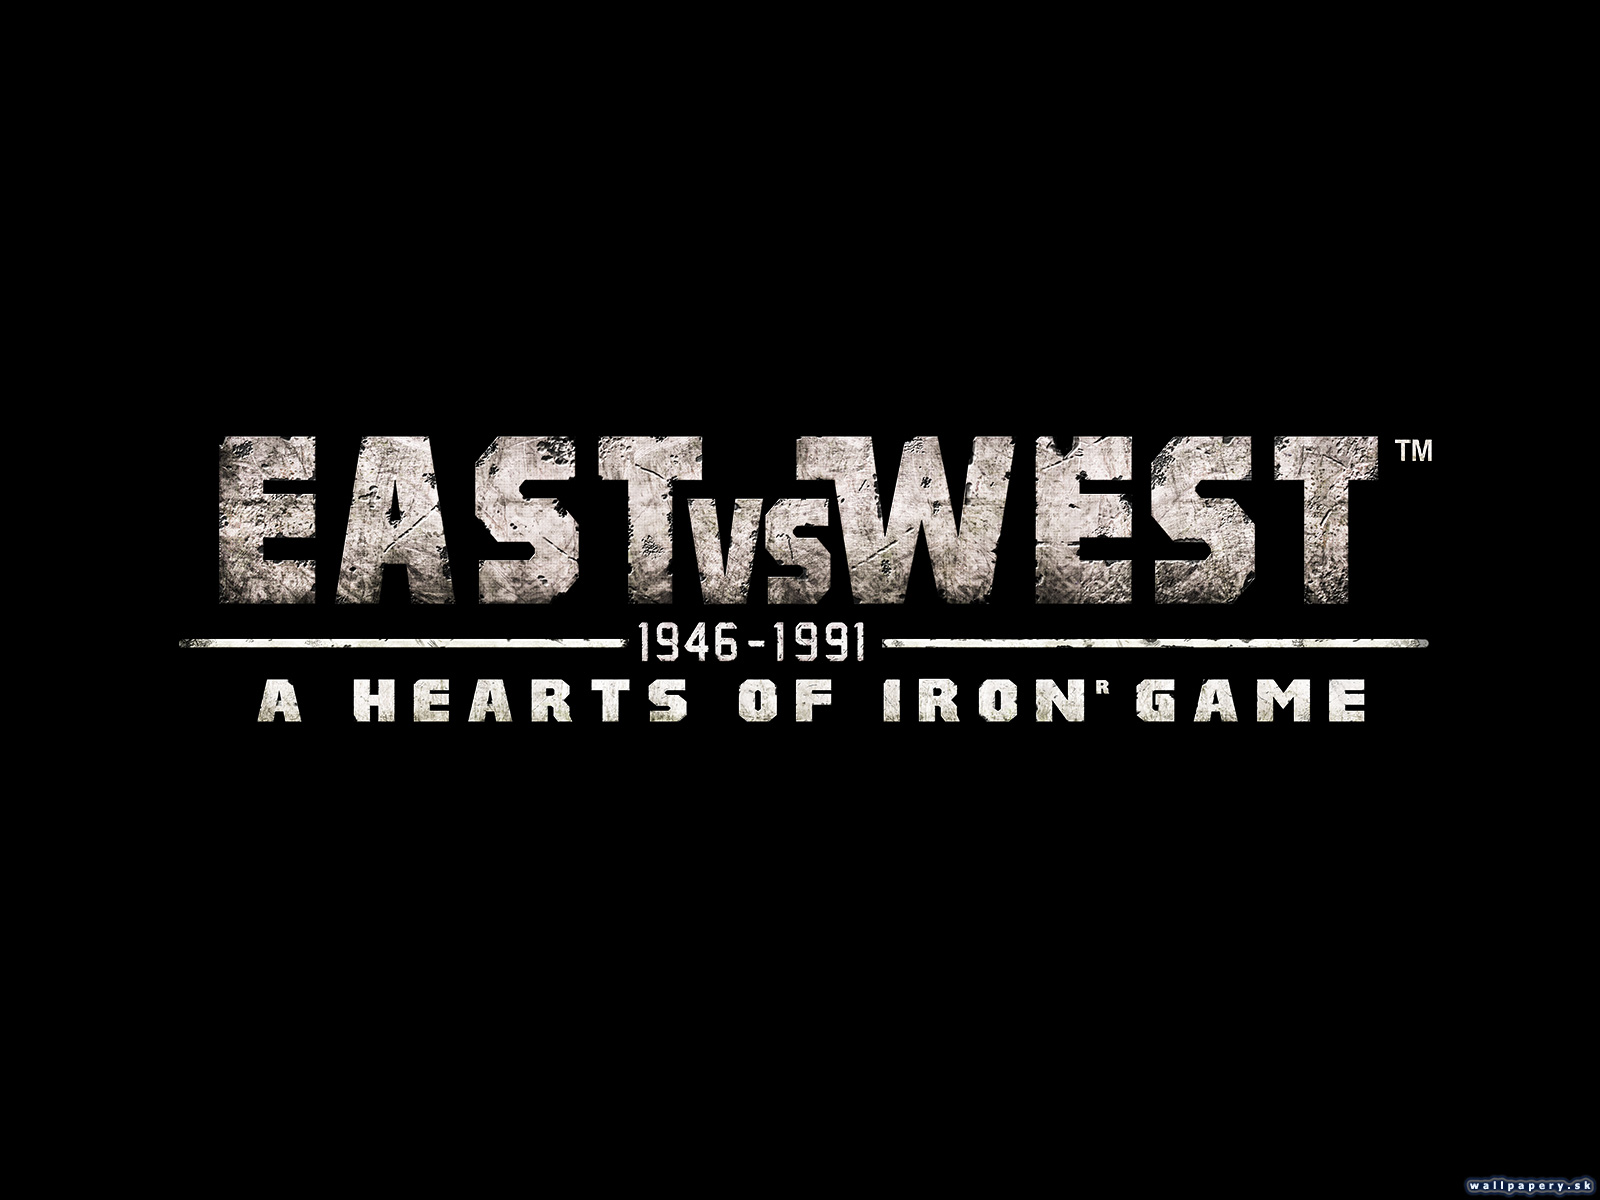 East vs. West: A Hearts of Iron Game - wallpaper 8